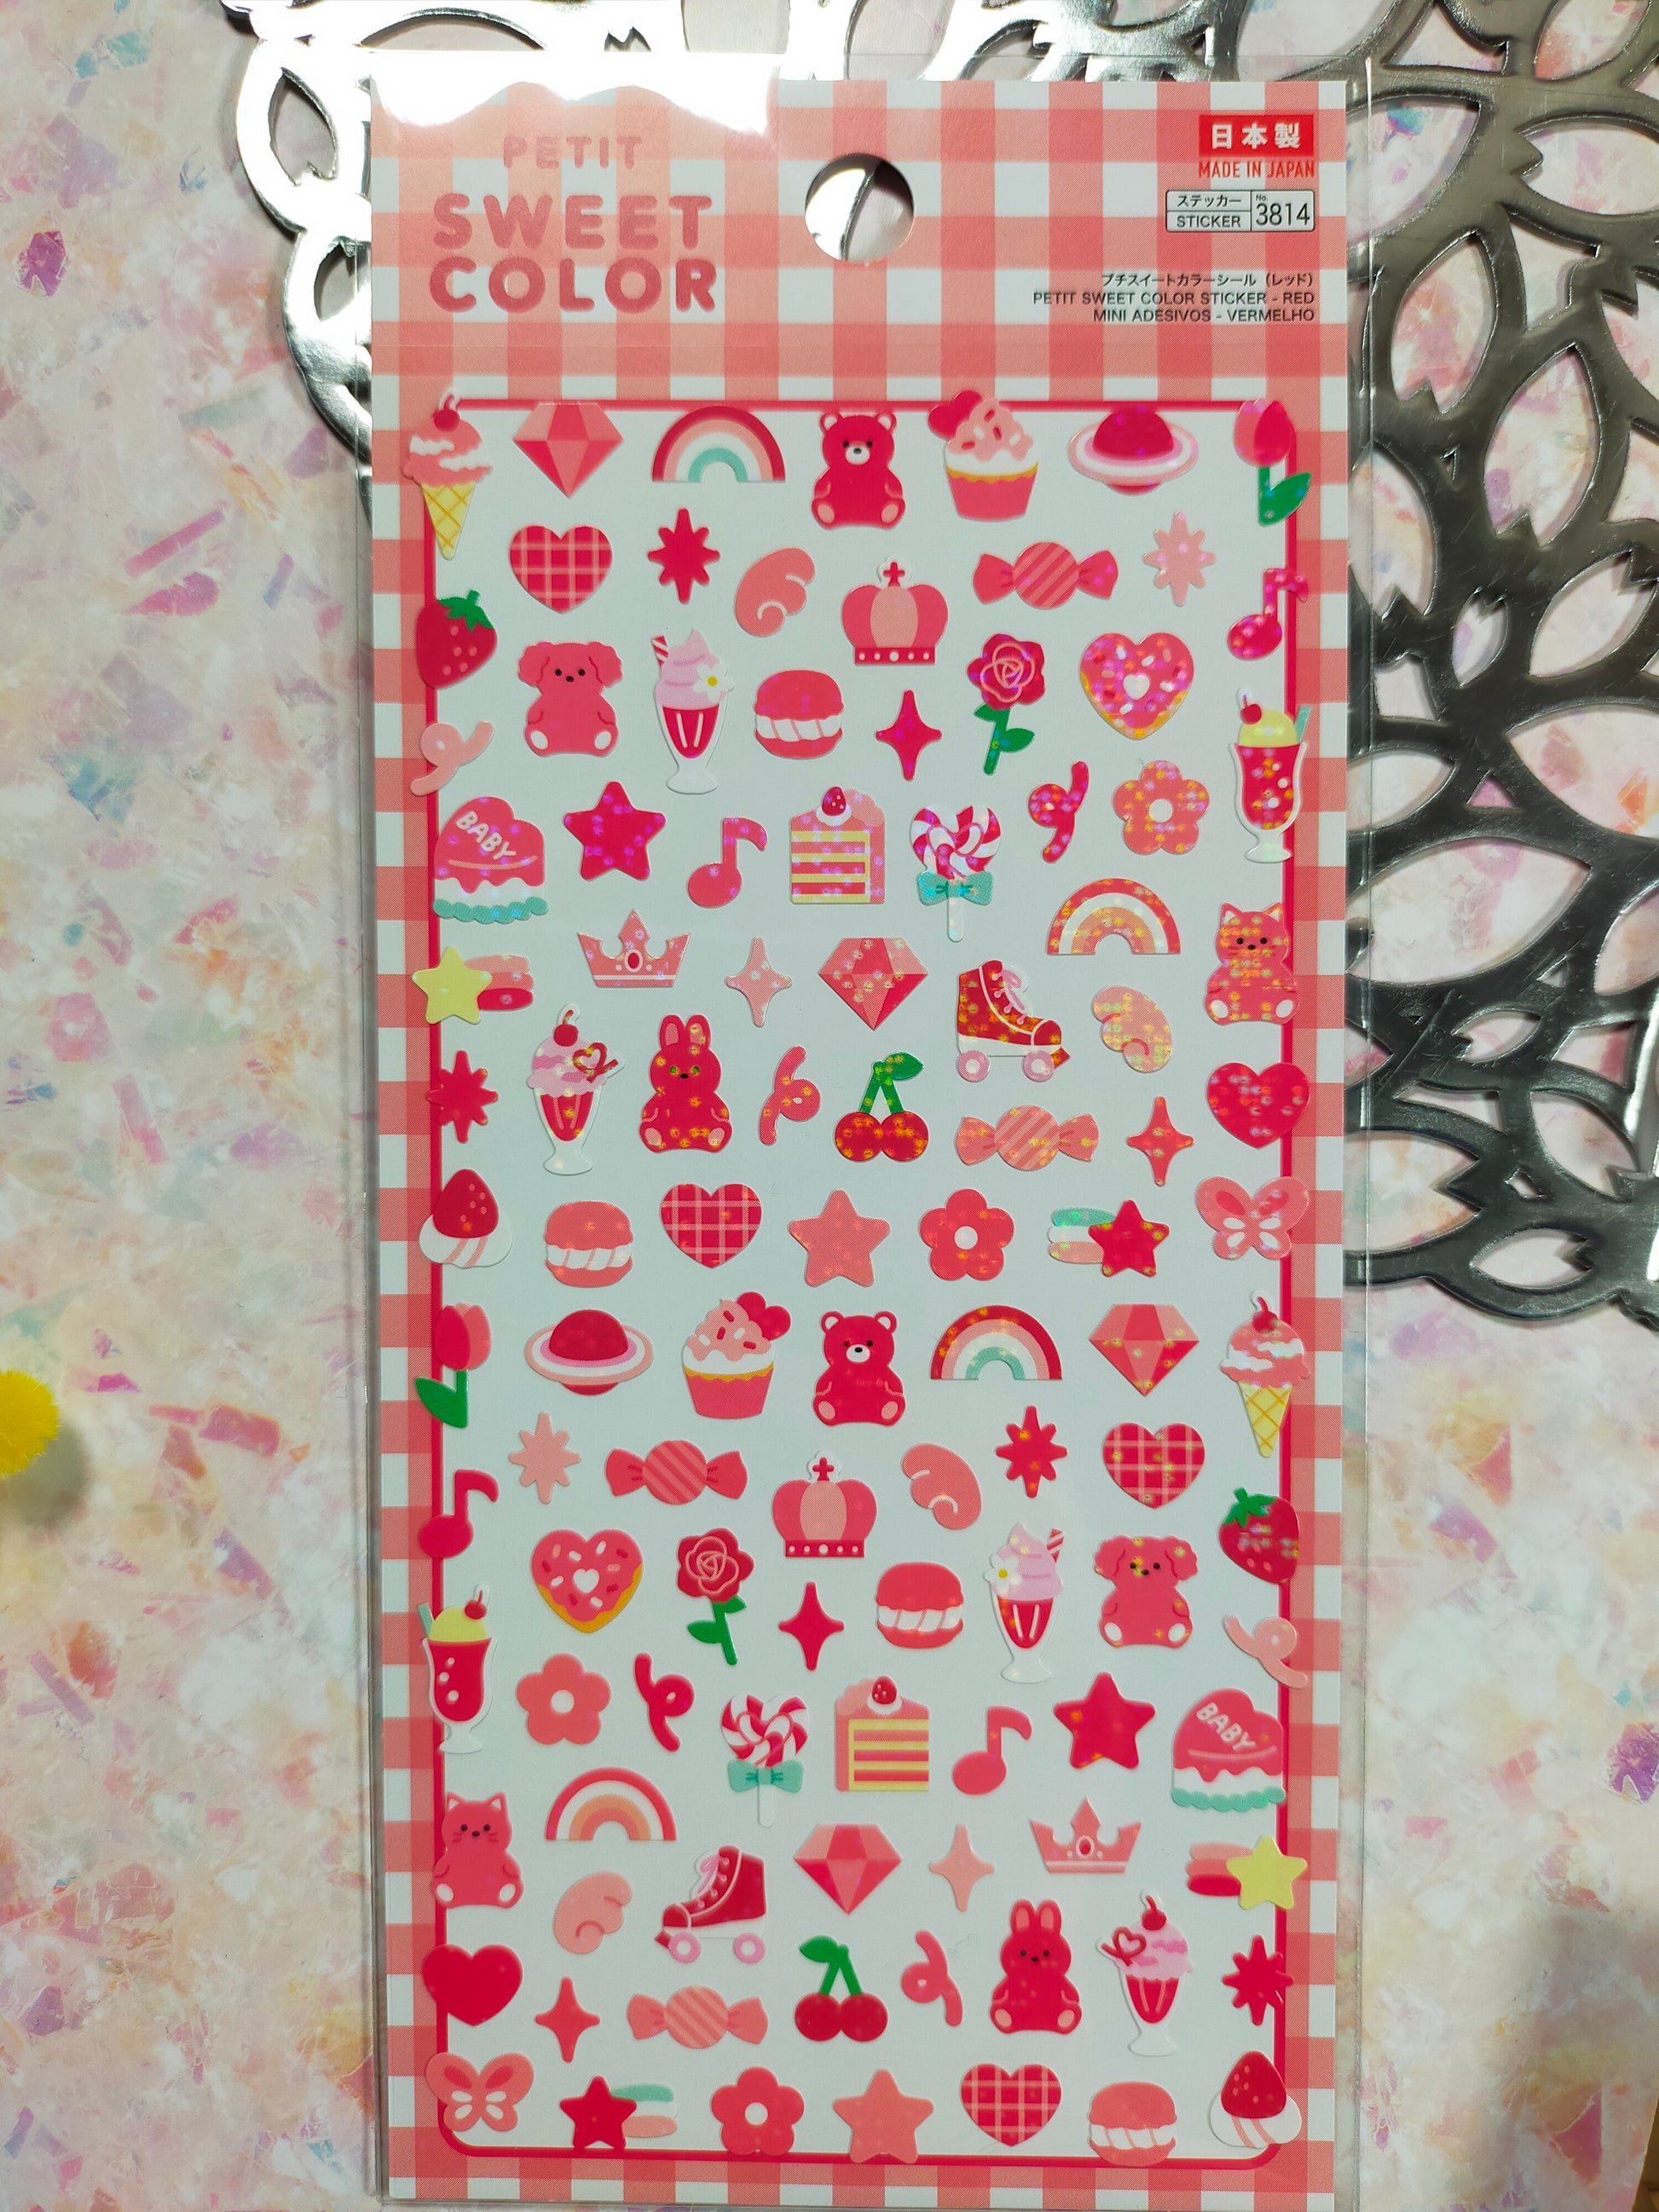 Petit sweet color stickers ,daiso _ Red / Pink / Orange / Yellow / Green / Blue / Purple / white / Black